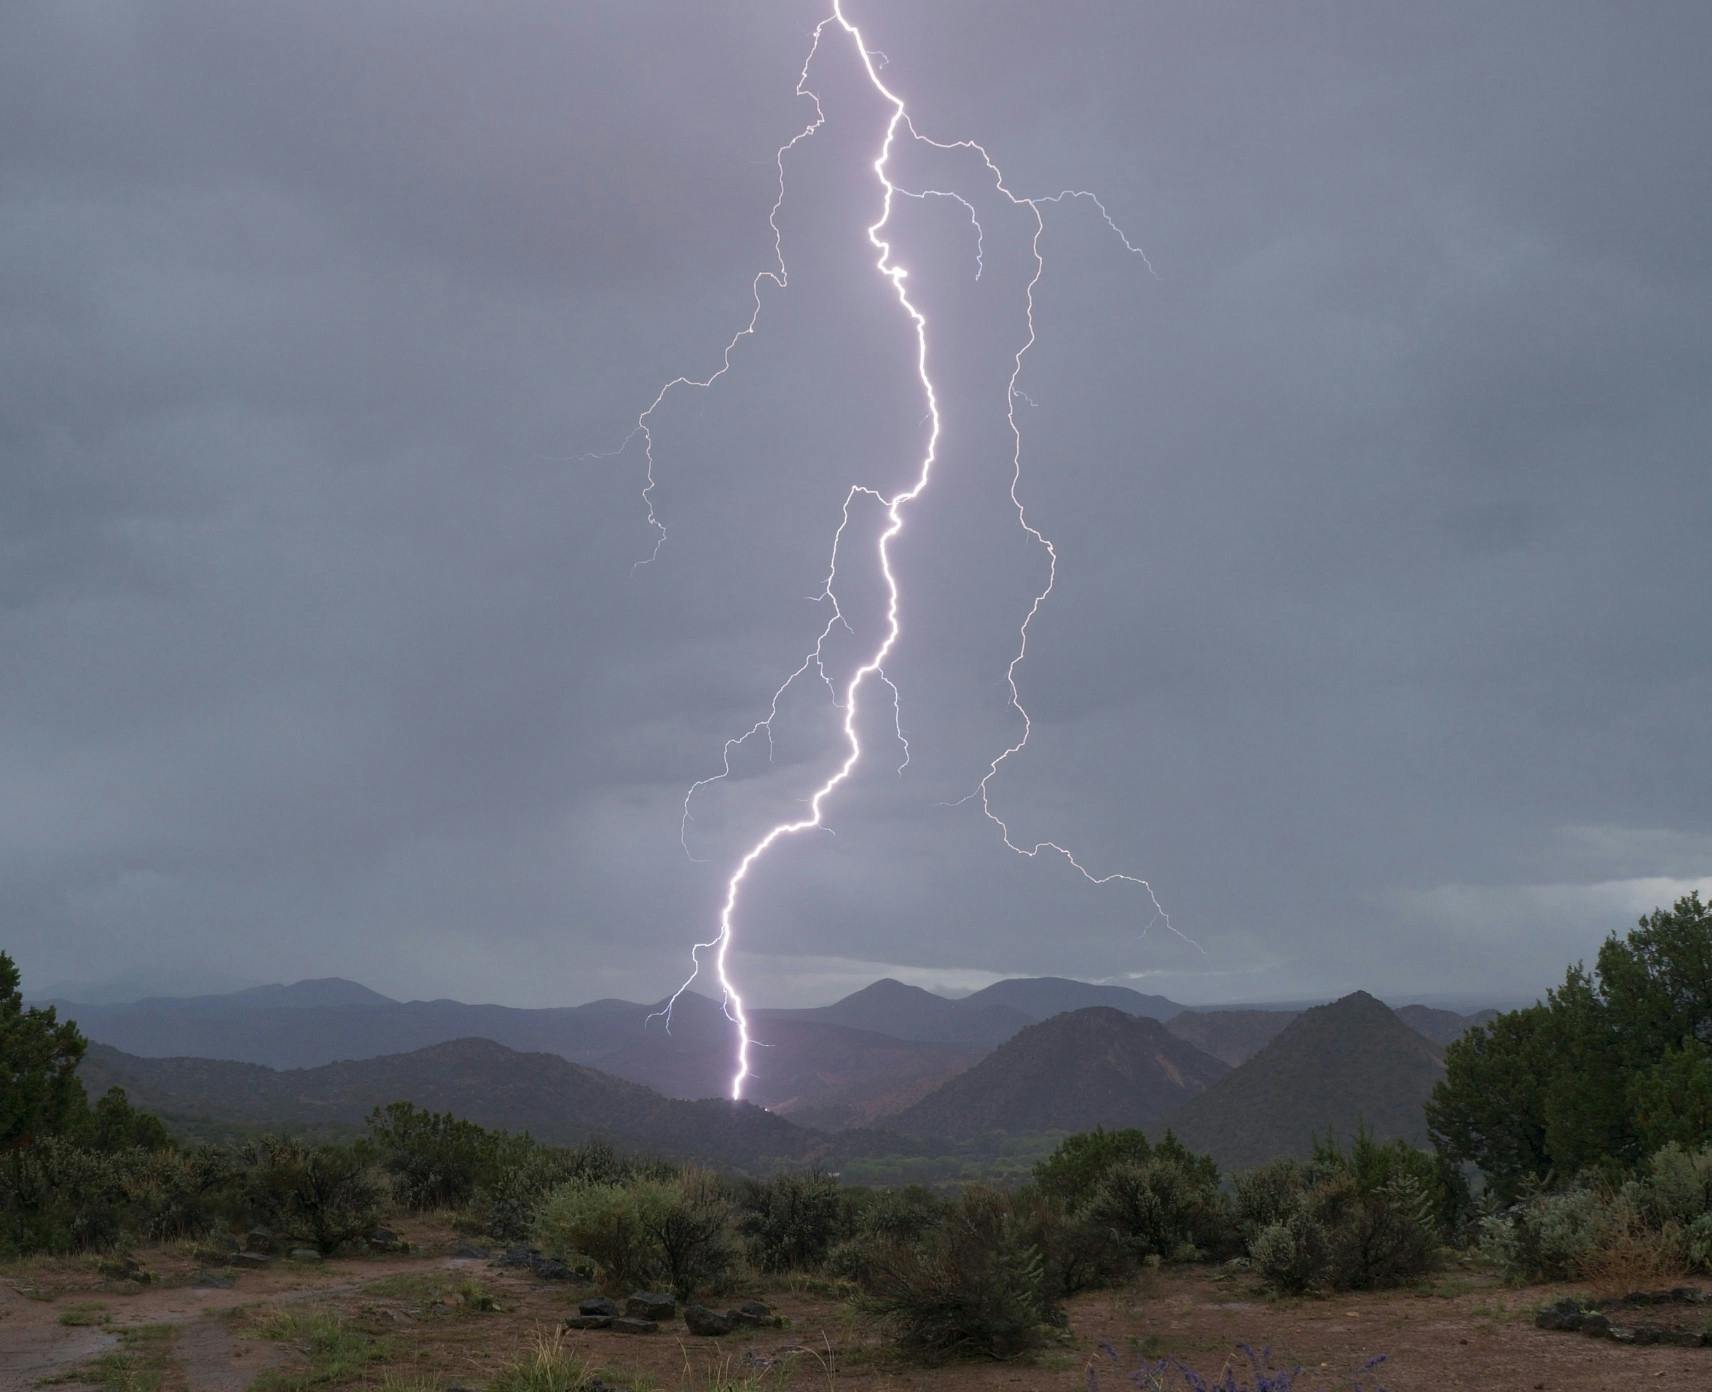 Bolt of lightning reaches from the sky into a mountain range.